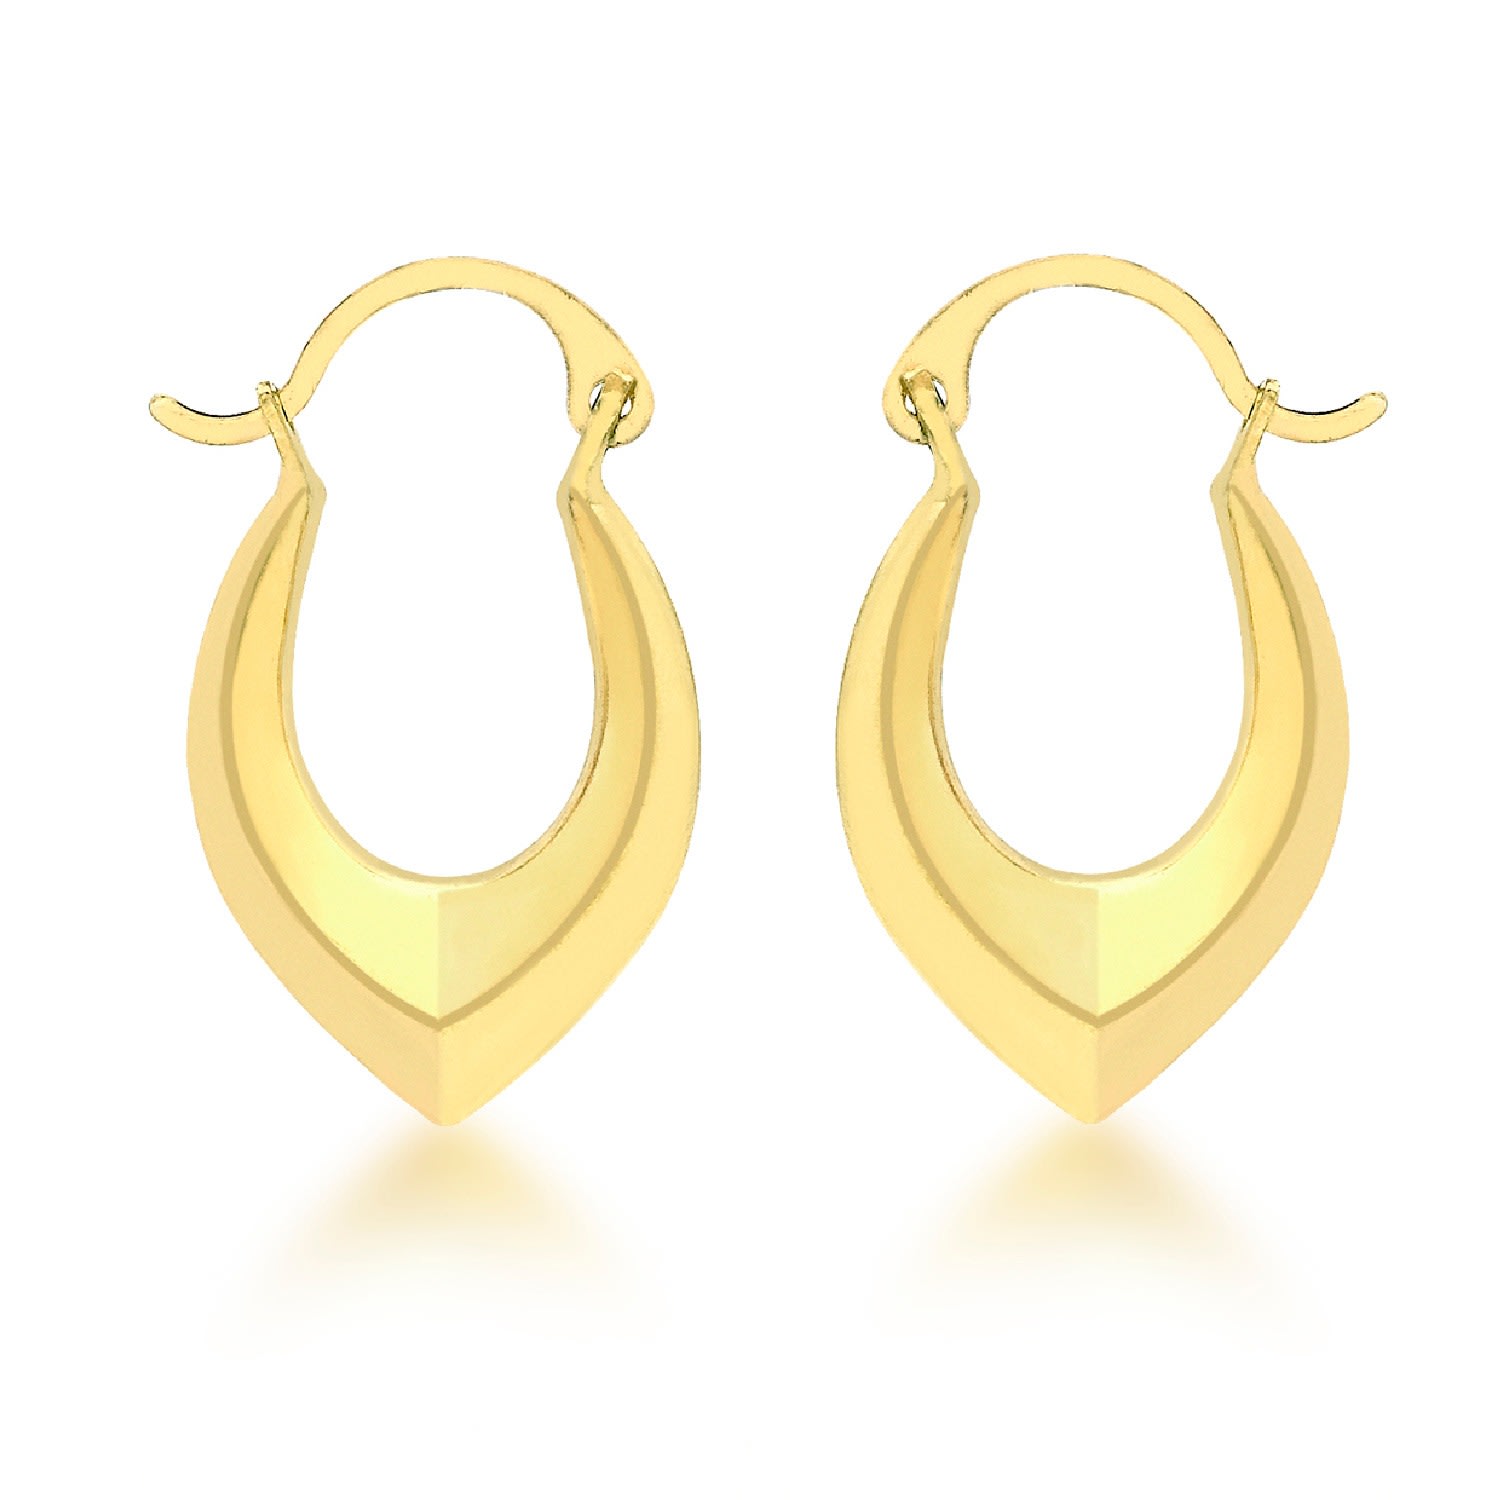 Women's Pointed Gold Creole Earrings Posh Totty Designs